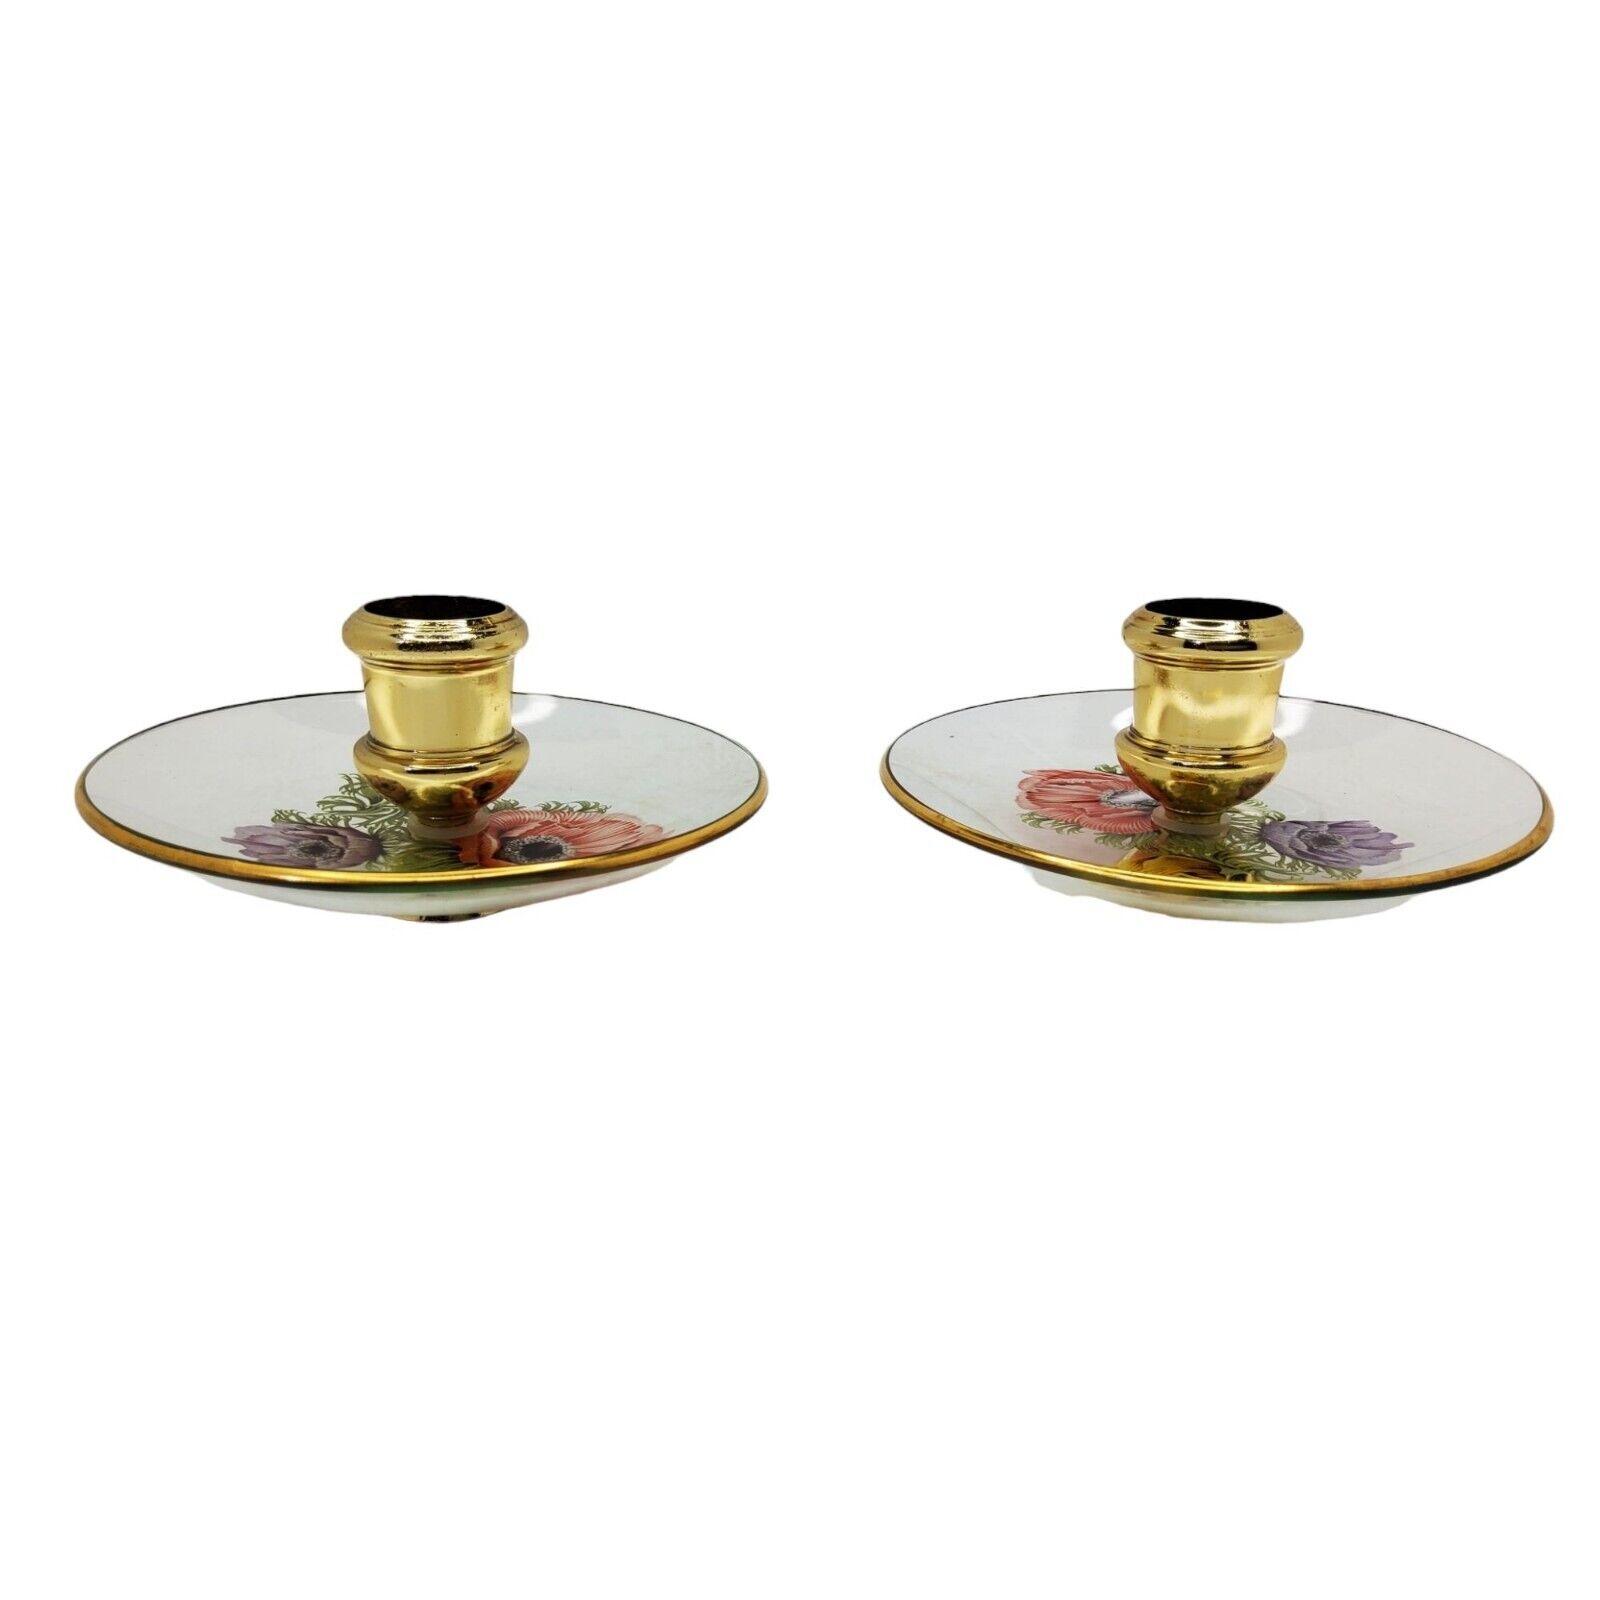 Vintage Chance Glass Candlestick Holder Set with Poppy Flowers and Gold Rim 5\